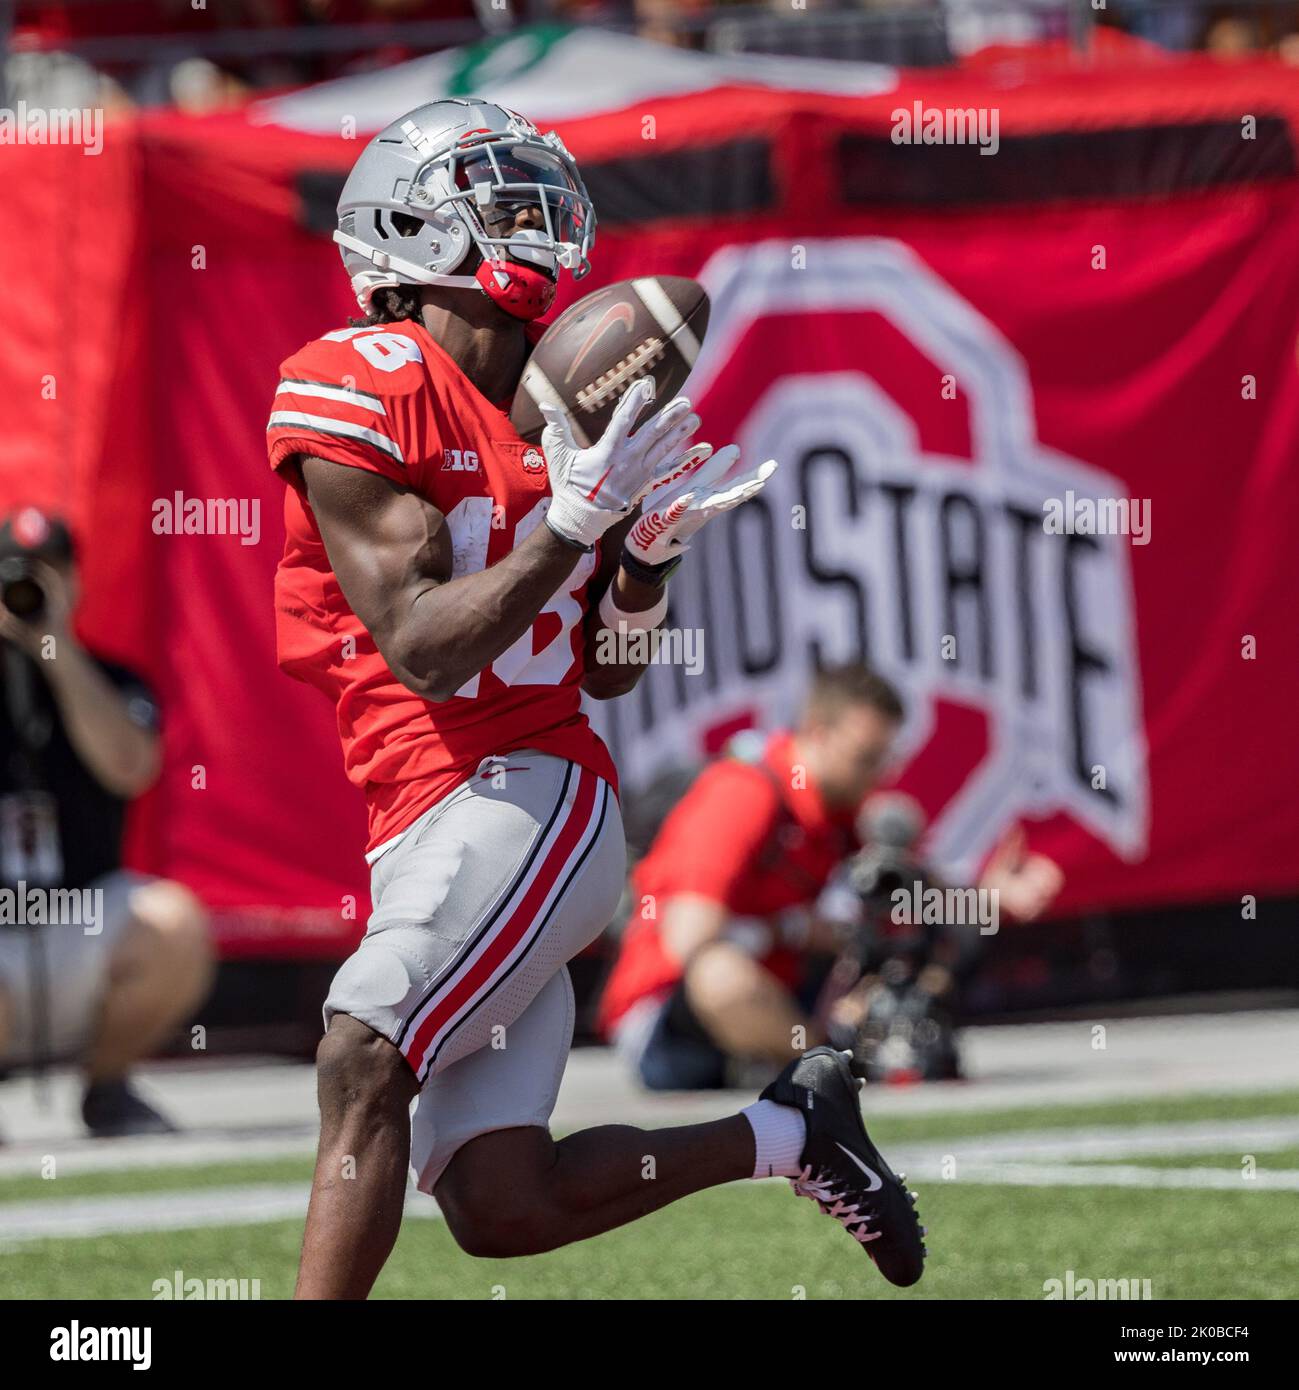 Marvin Harrison Jr could be the Xfactor for Ohio State against Georgia in  CFP semifinal  Sporting News